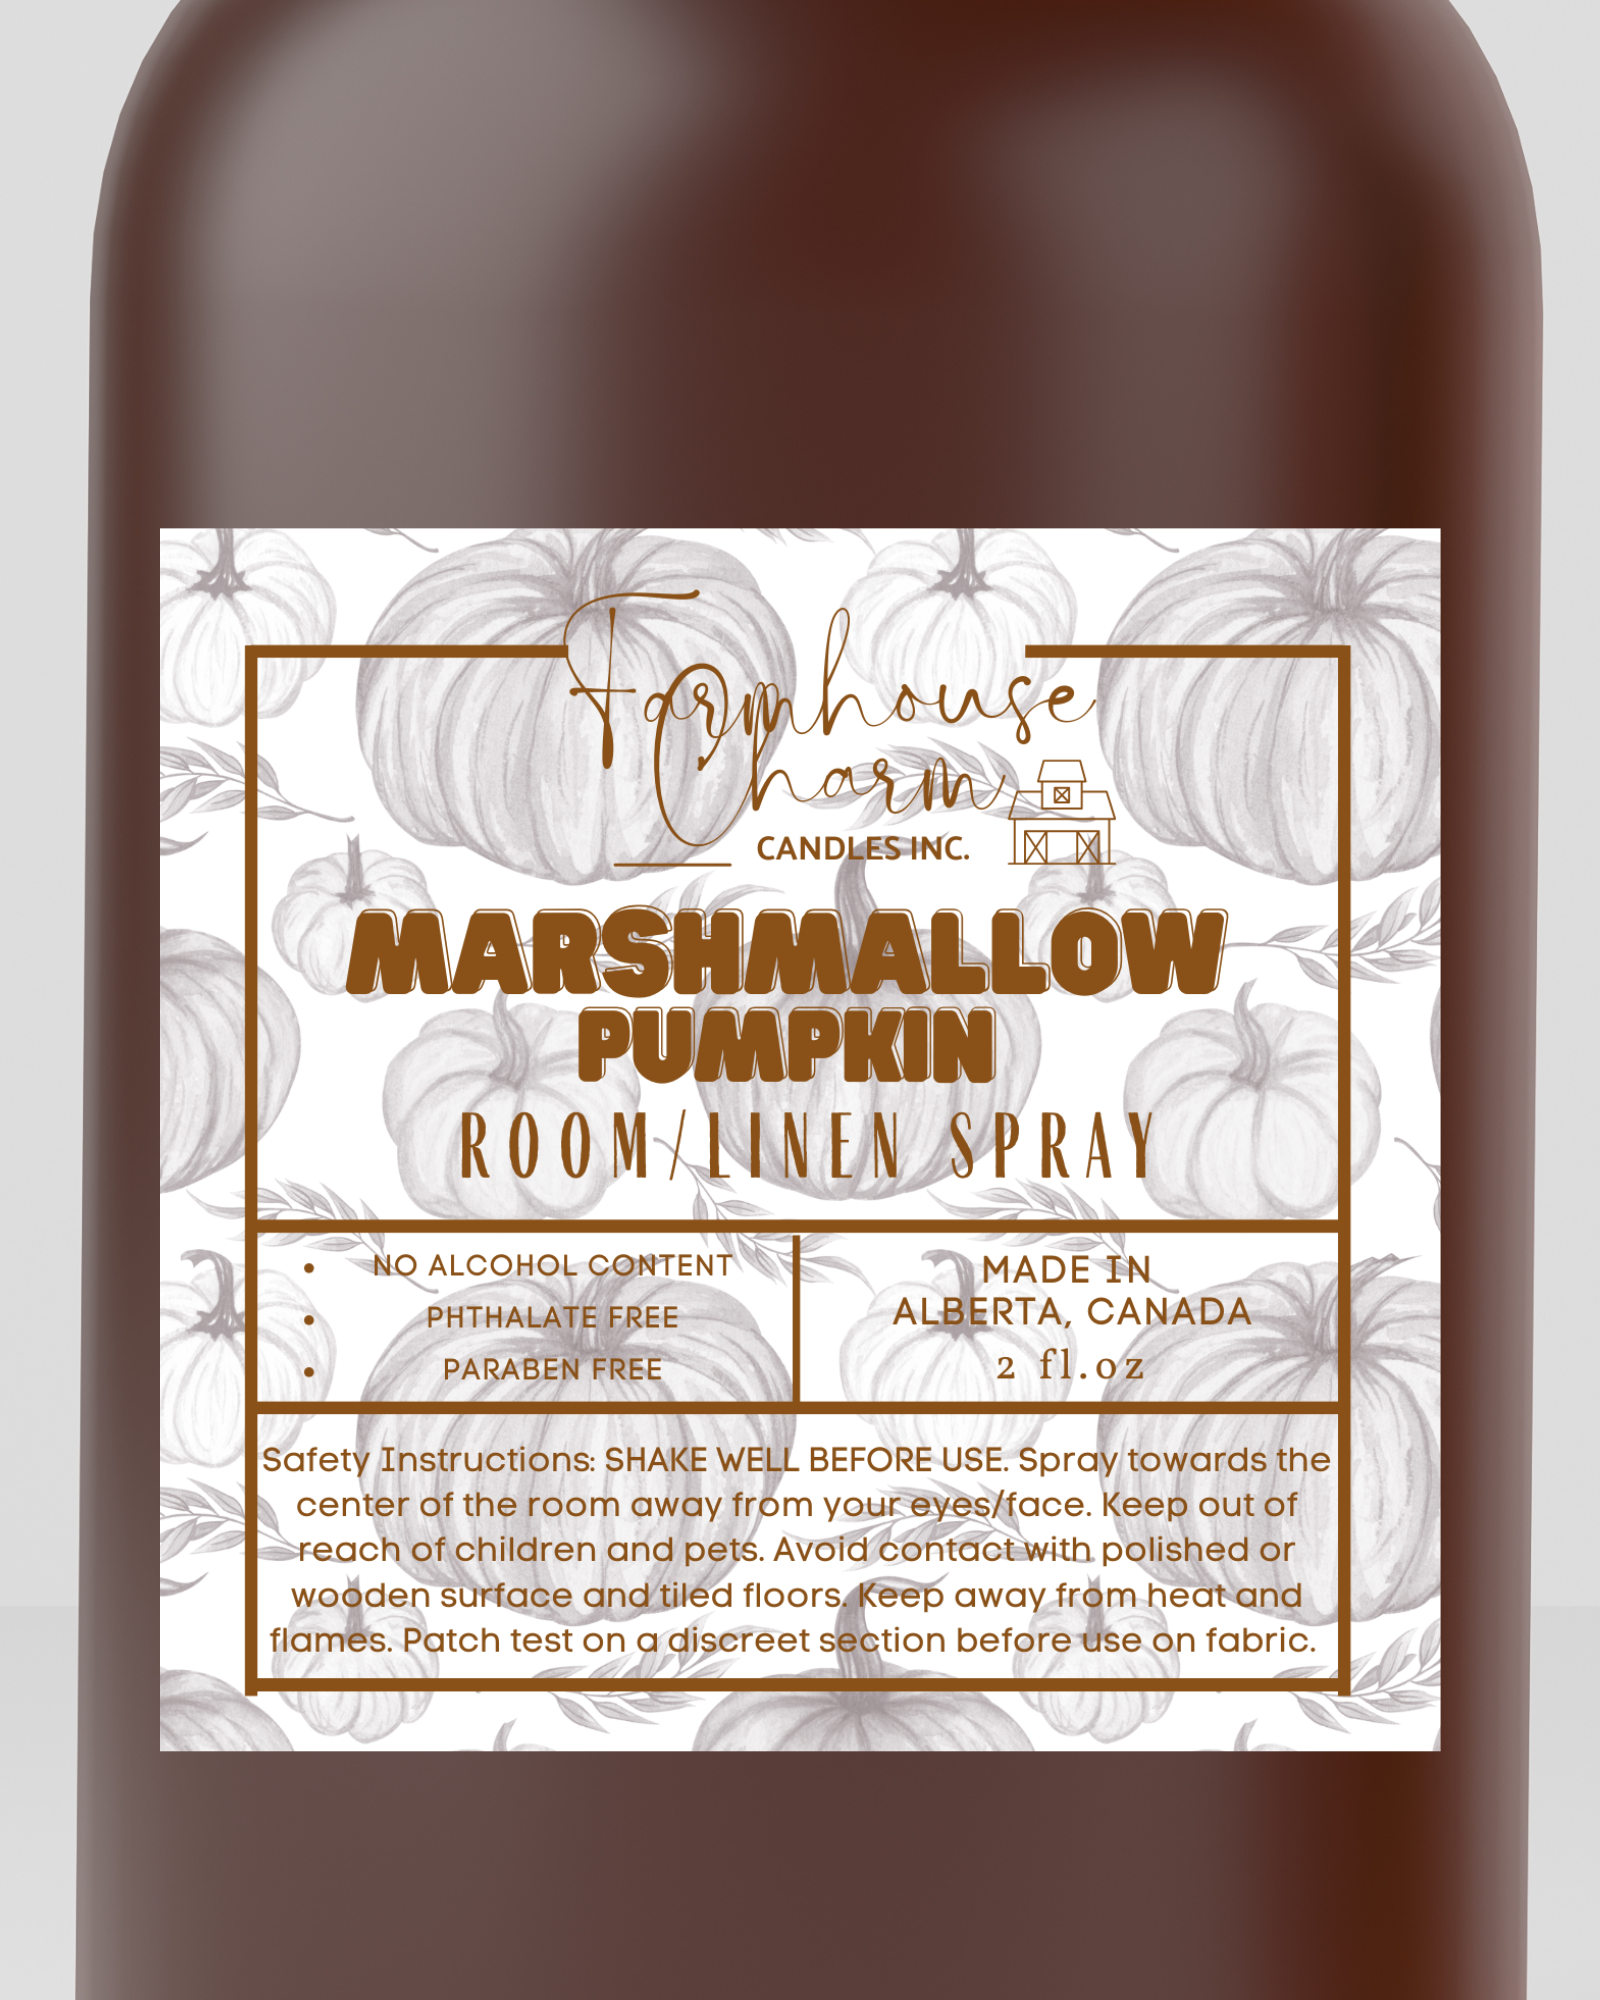 Marshmallow Pumpkin Room and Linen Spray by Farmhouse Charm Candles is a perfect addition to any home. The unique fragrance combines the sweet and comforting scents of vanilla, marshmallow, and pumpkin. The sweet and comforting scent of these spray creates a cozy atmosphere that is perfect for relaxing and unwinding after a long day.